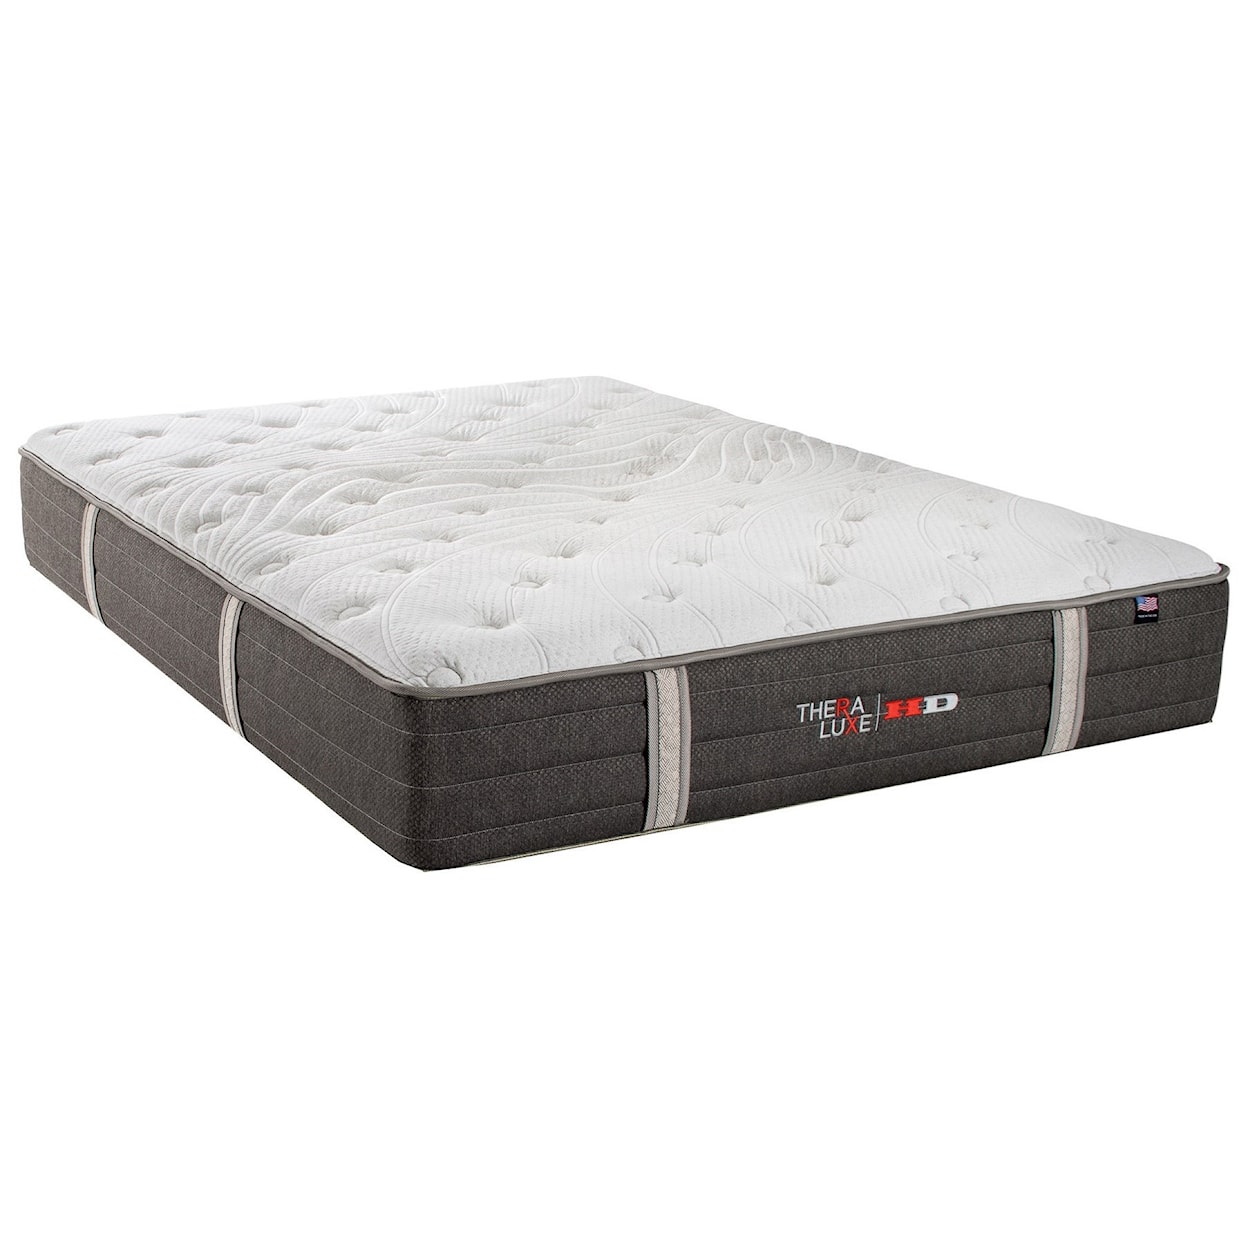 Therapedic Theraluxe Aspen Queen Firm Pocketed Coil Mattress